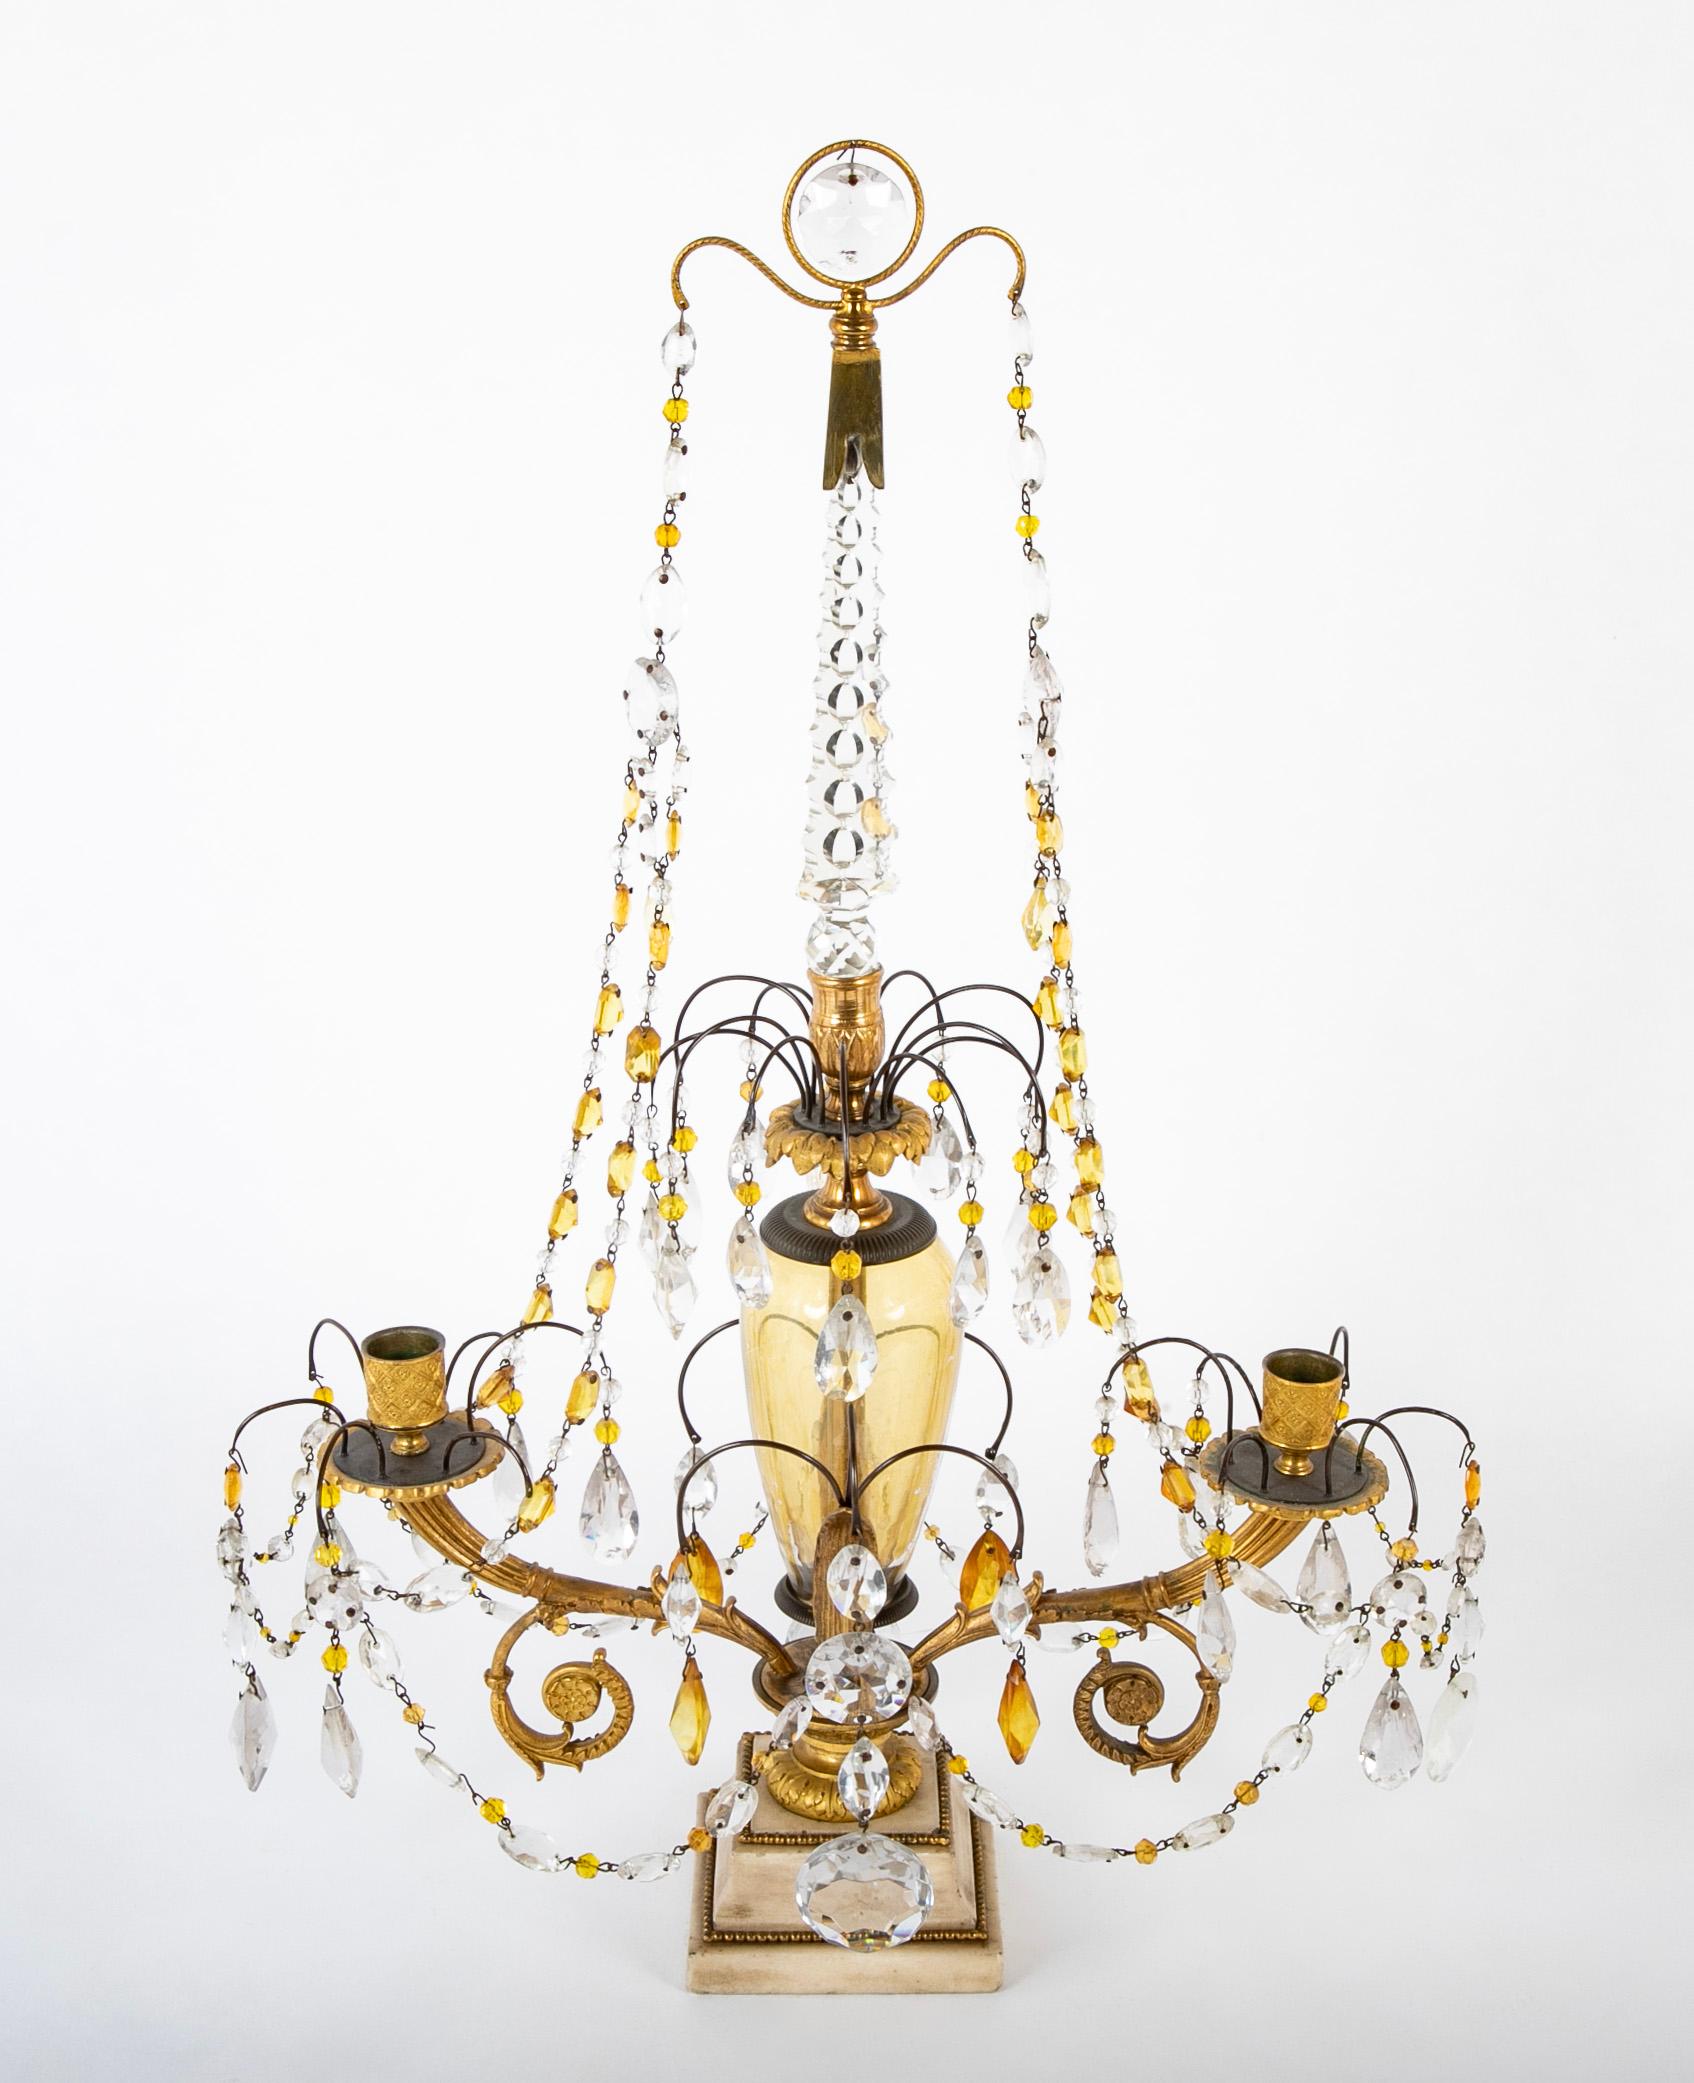 Pair of Swedish crystal candelabra having canary yellow centers and bronze arms & fittings resting on white marble bases. 